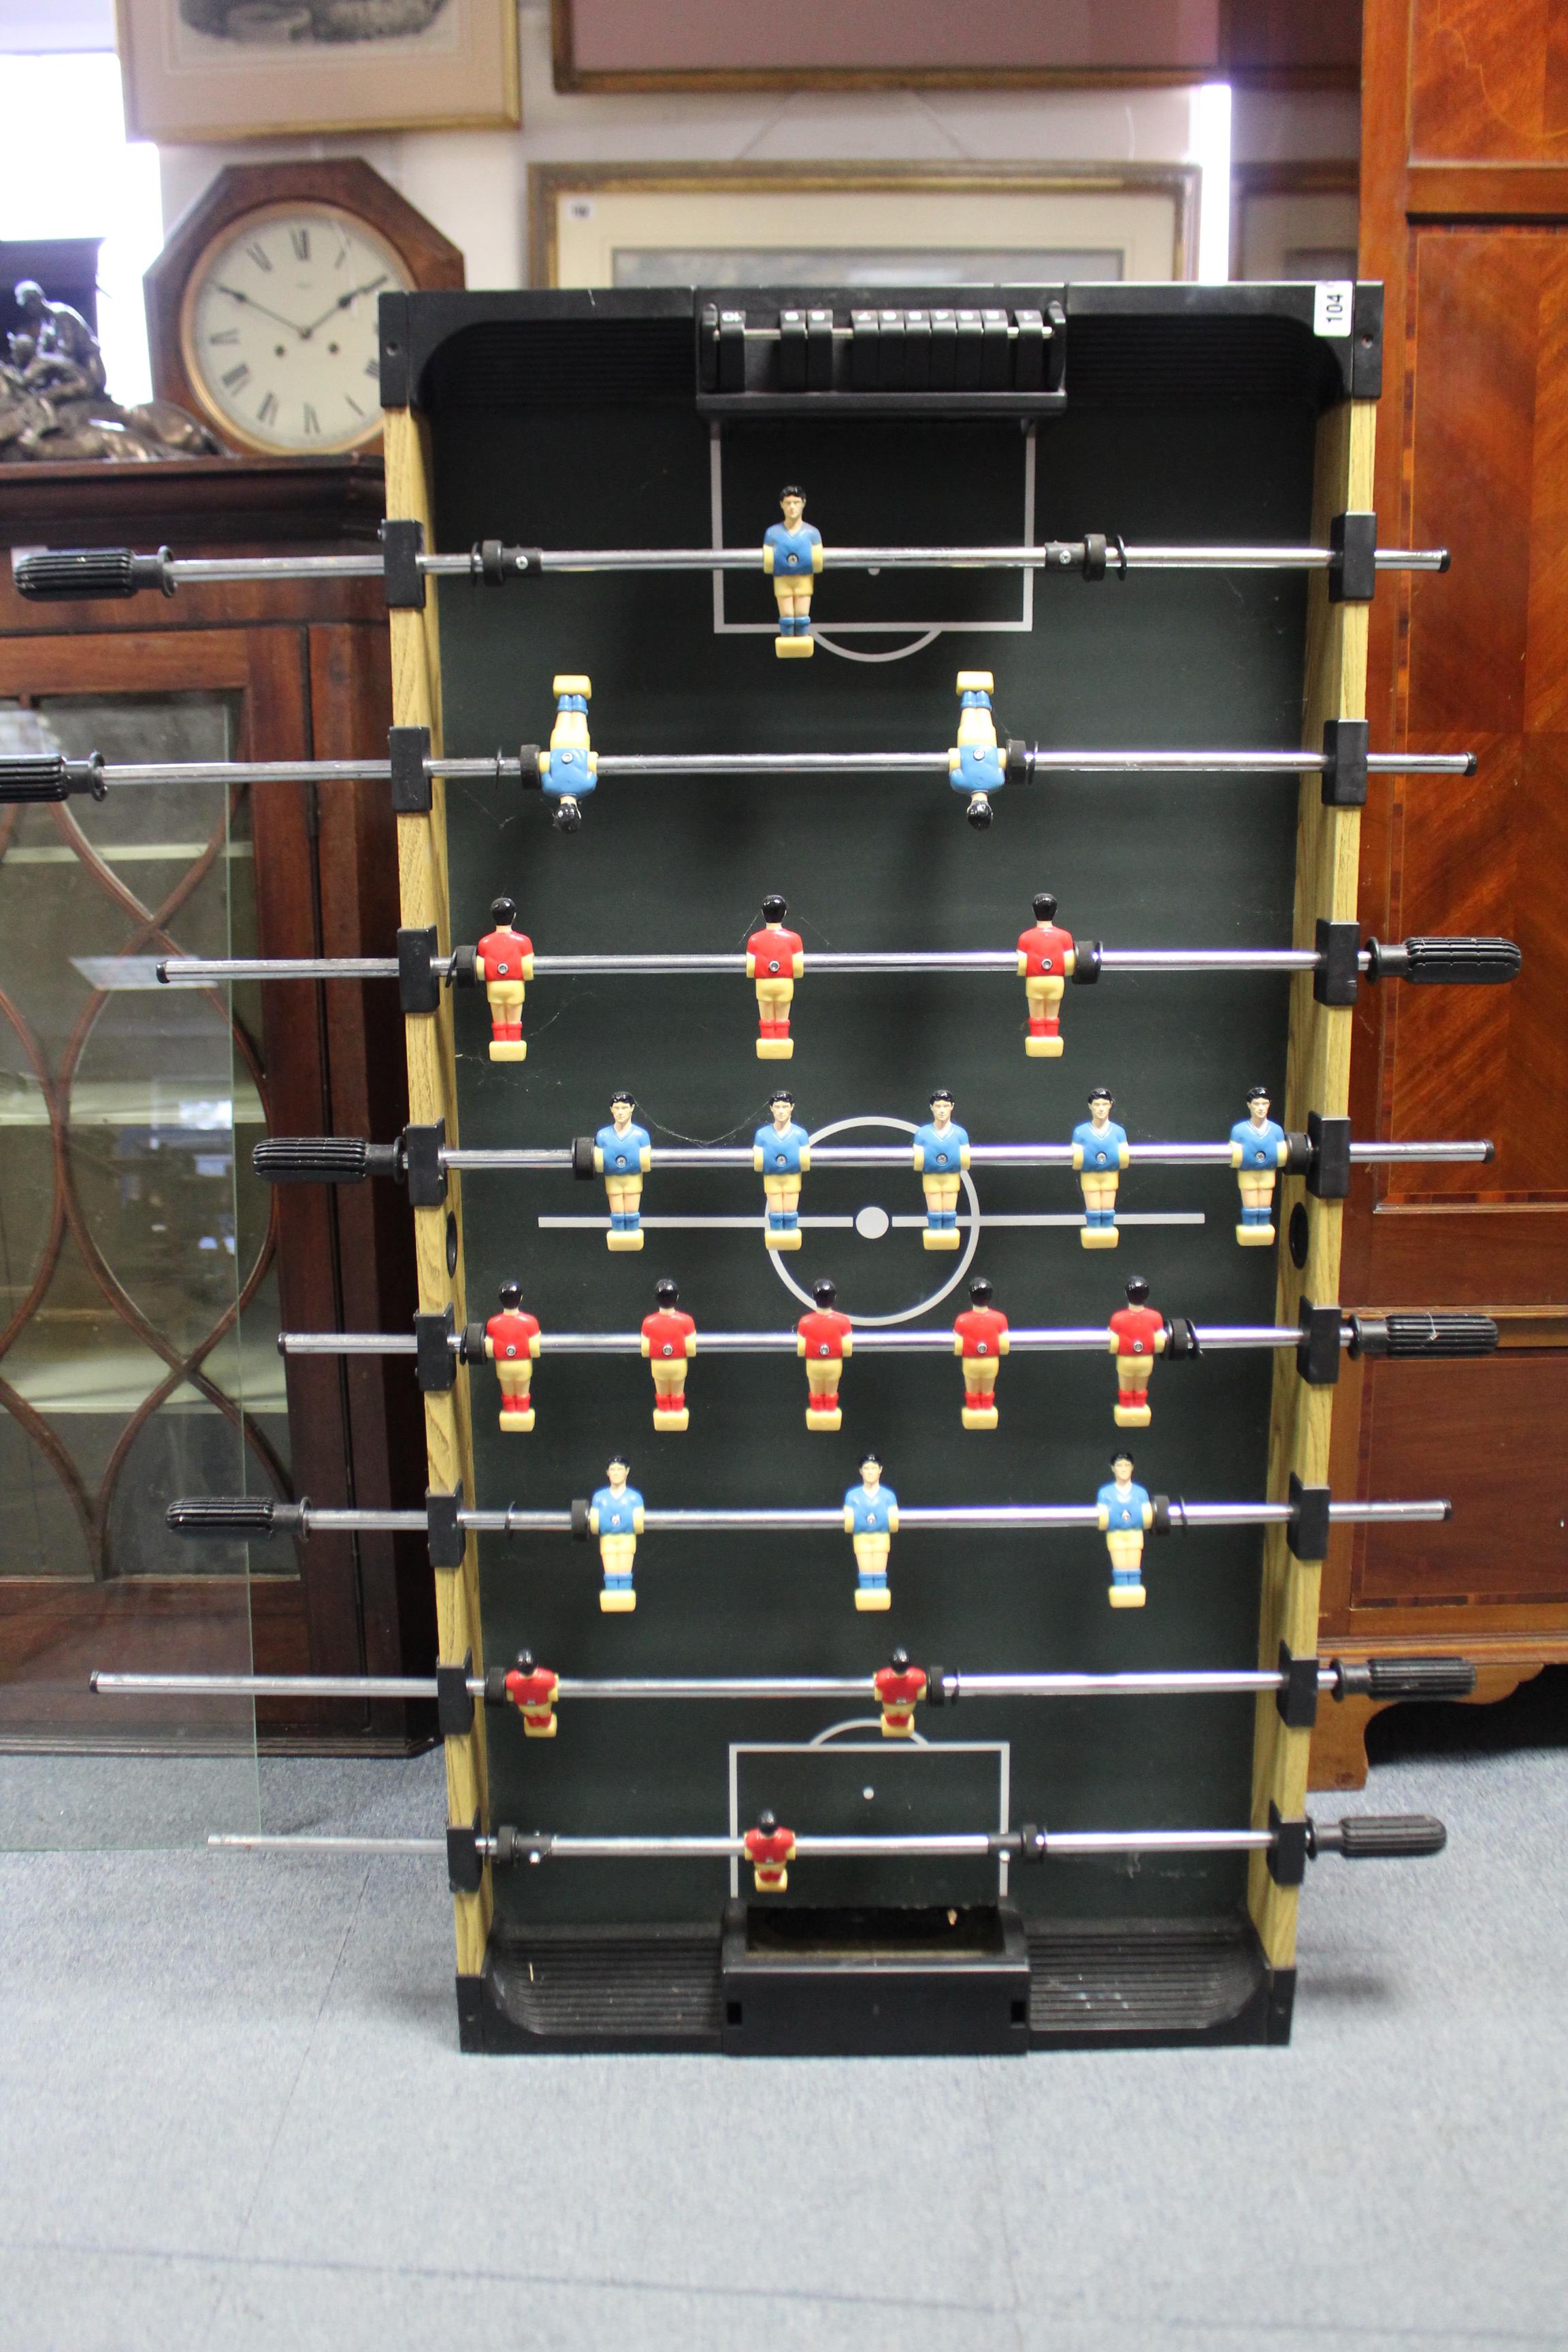 A B.C.E. table football game on square legs, 4’ x 2’. - Image 3 of 4